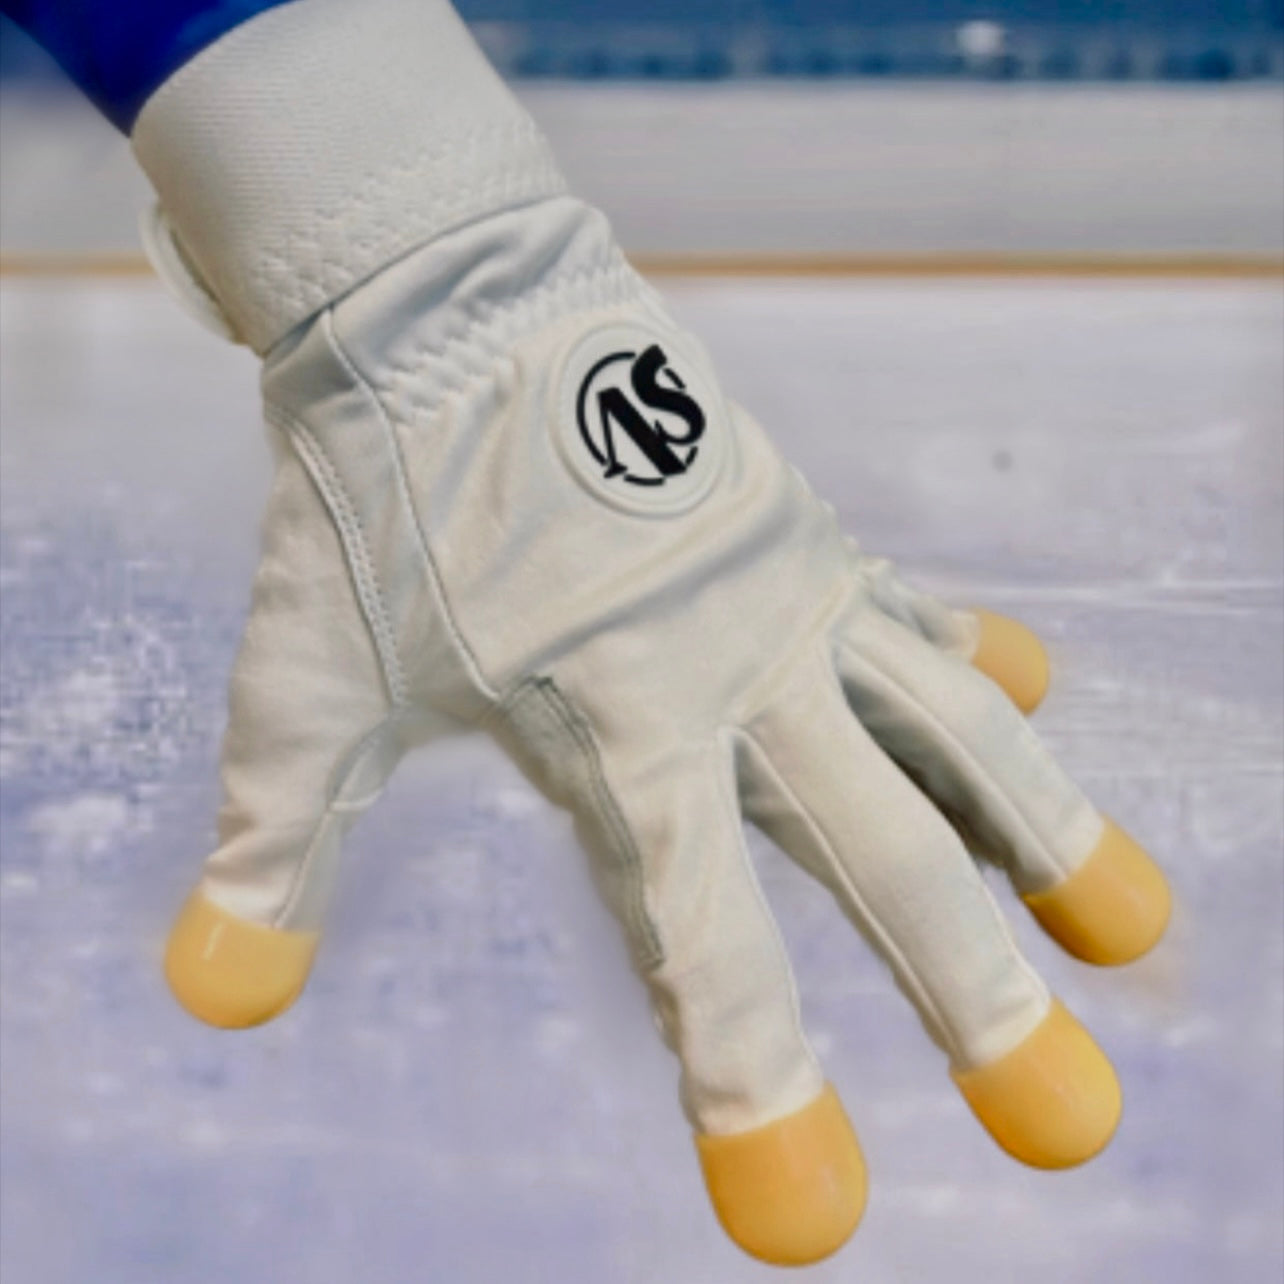 anti-cut gloves with tips yellow blue red tips level 5 Dyneema leather gloves protection short track speed skating cut proof gloves white gloves